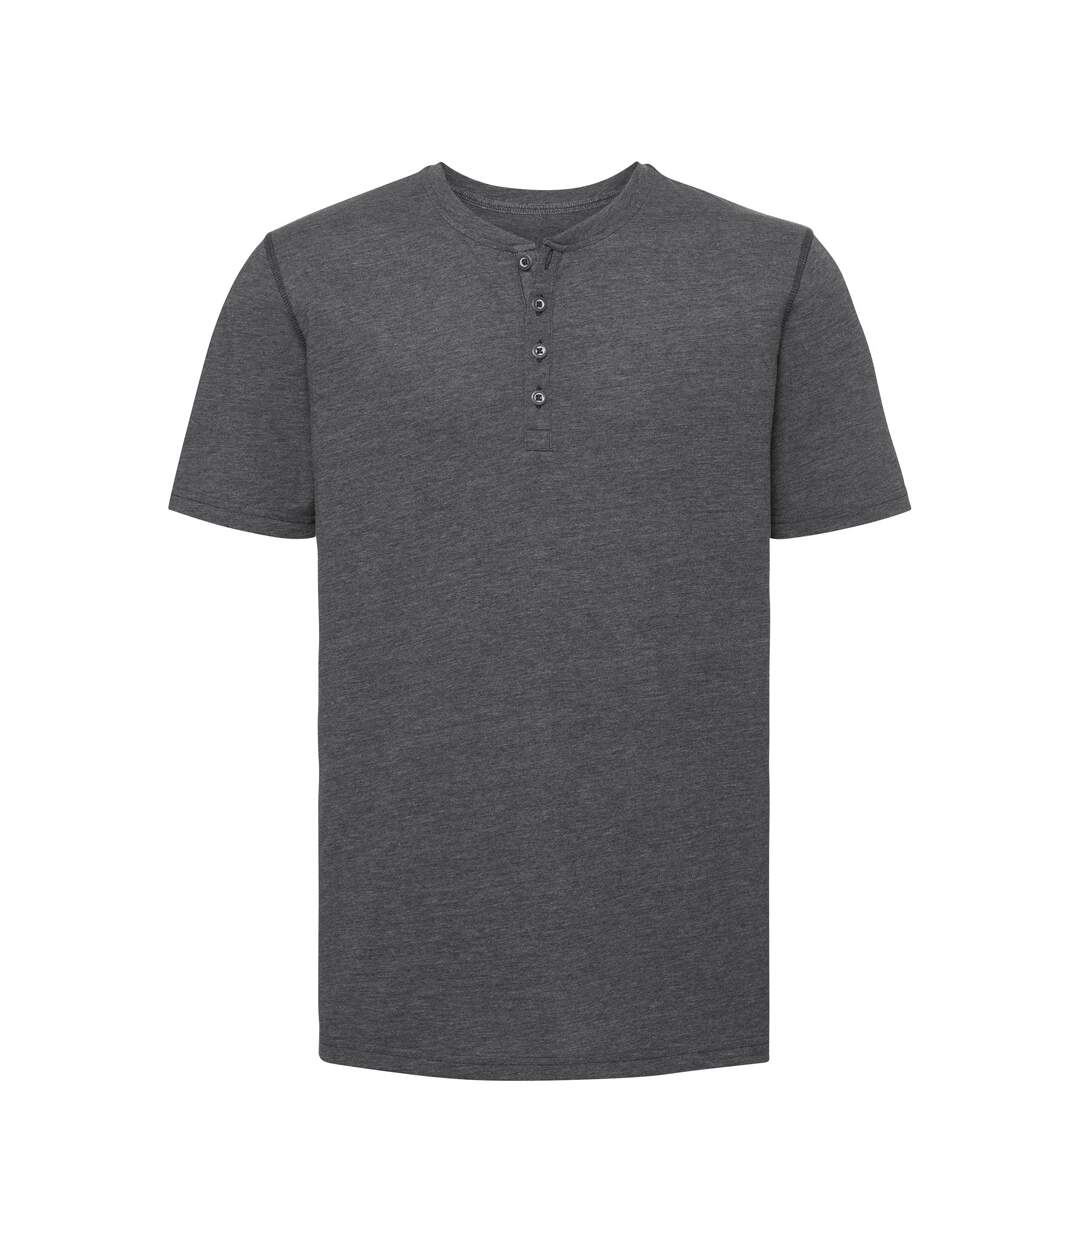 Russell - T-shirt manches courtes HENLEY - Homme (Gris chiné) - UTPC3636